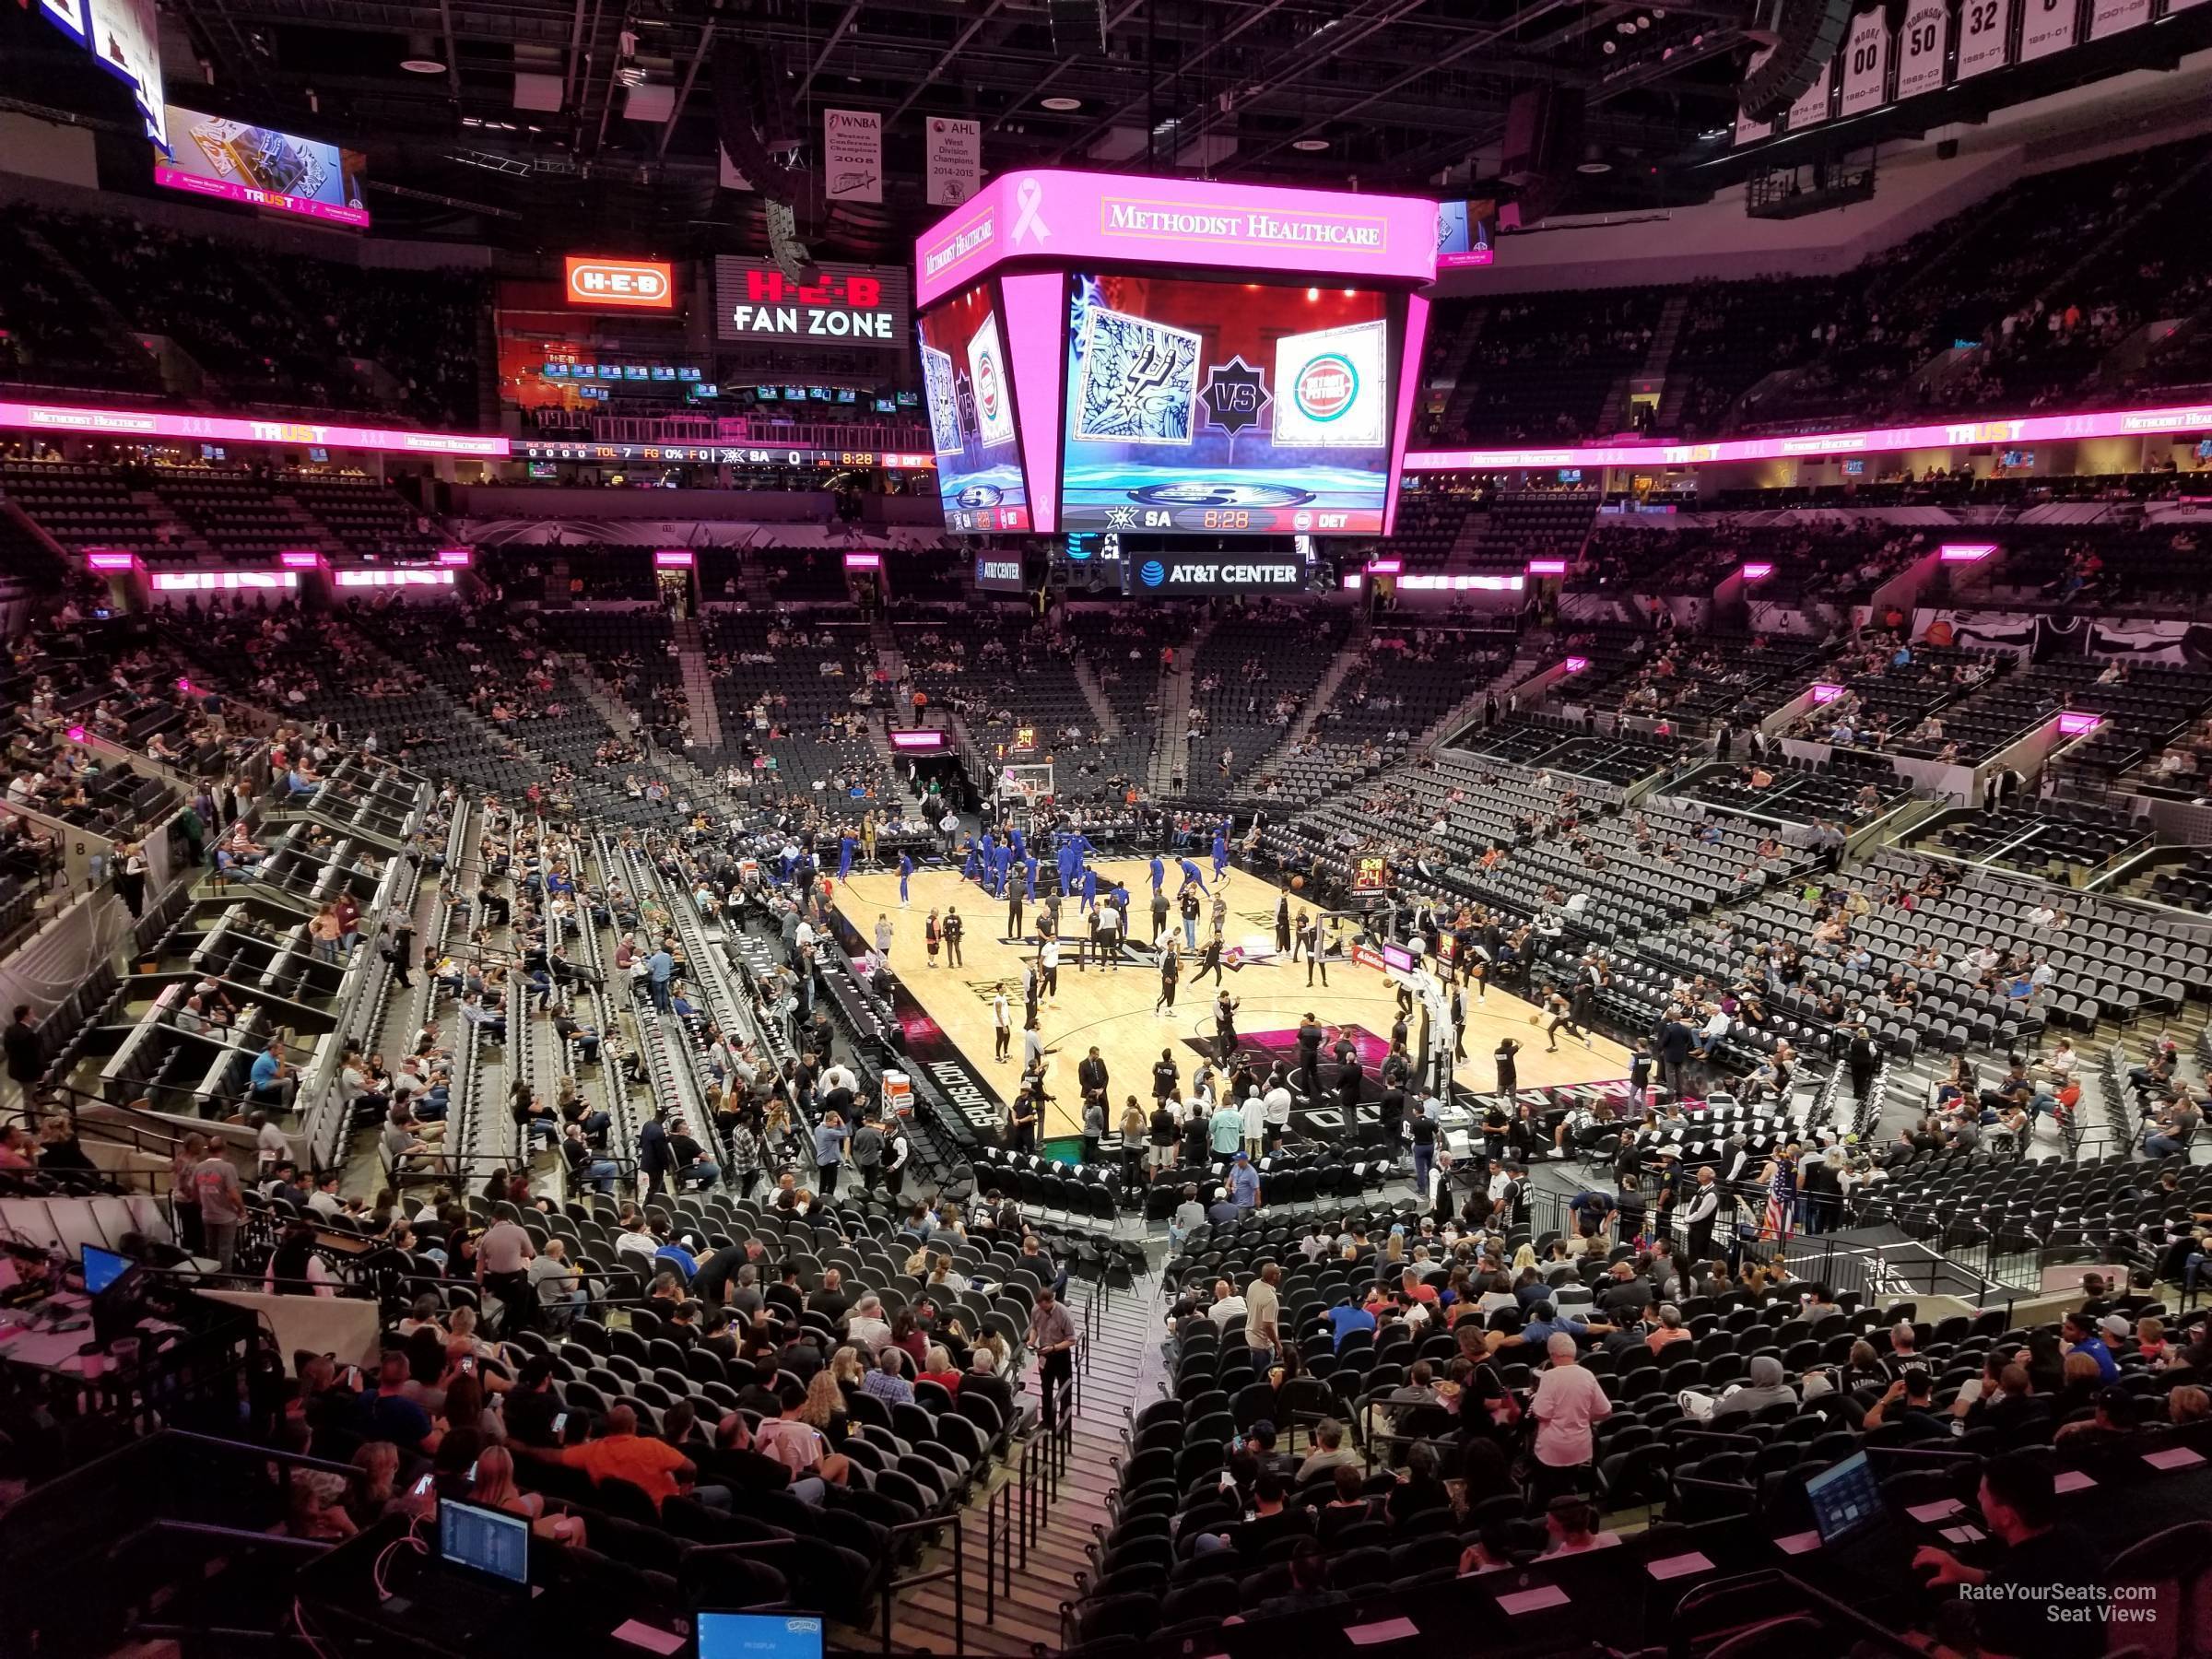 section 102, row 33 seat view  for basketball - at&t center